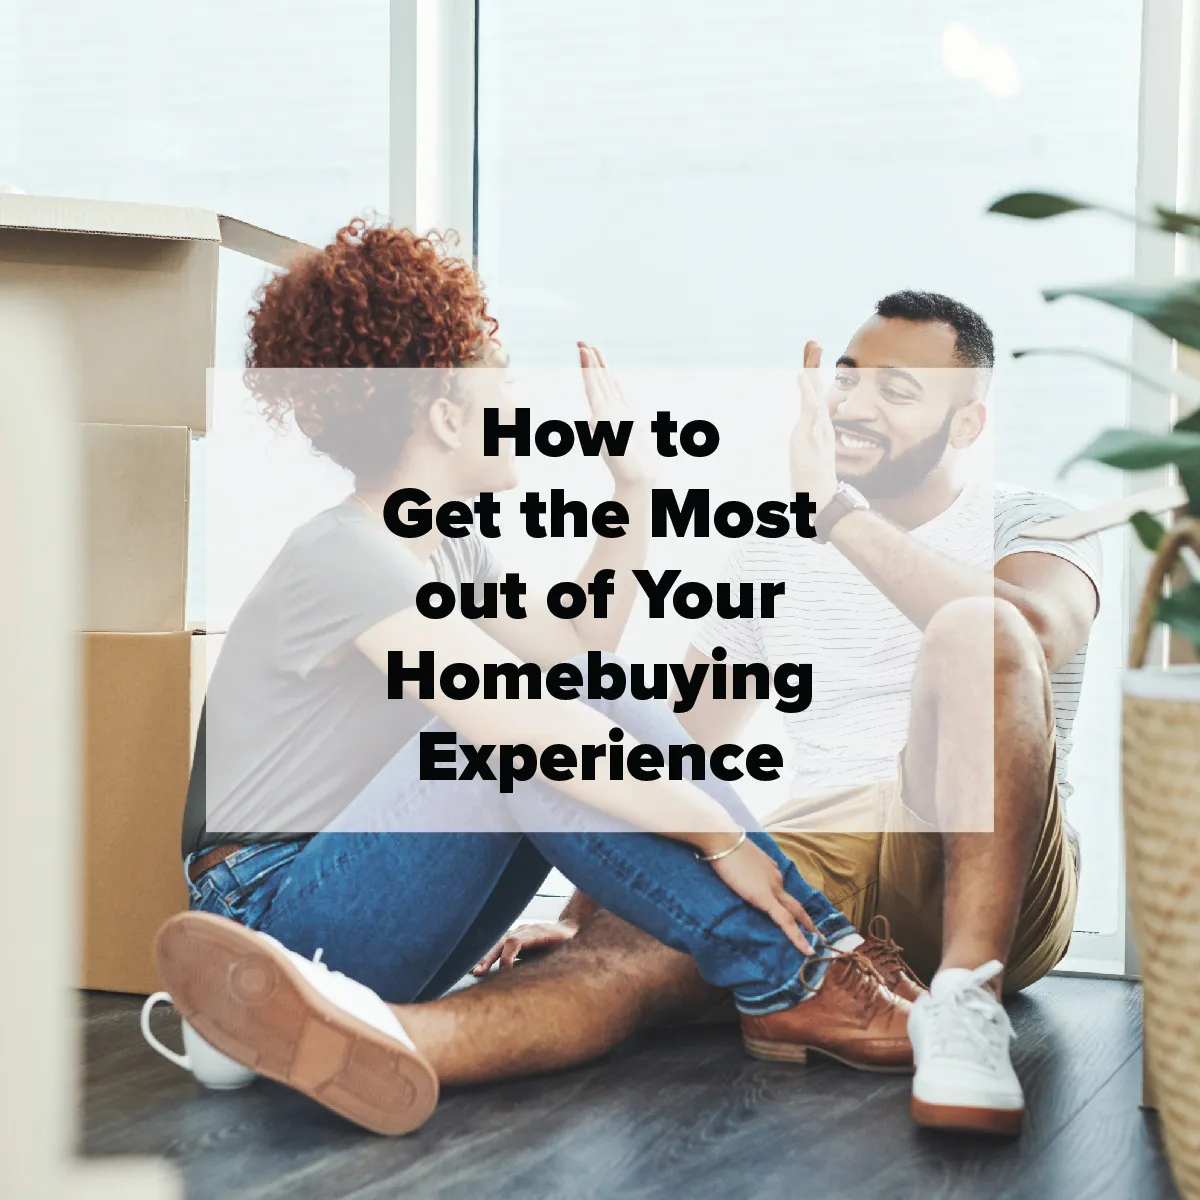 How to Get the Most Out of Your Homebuying Experience